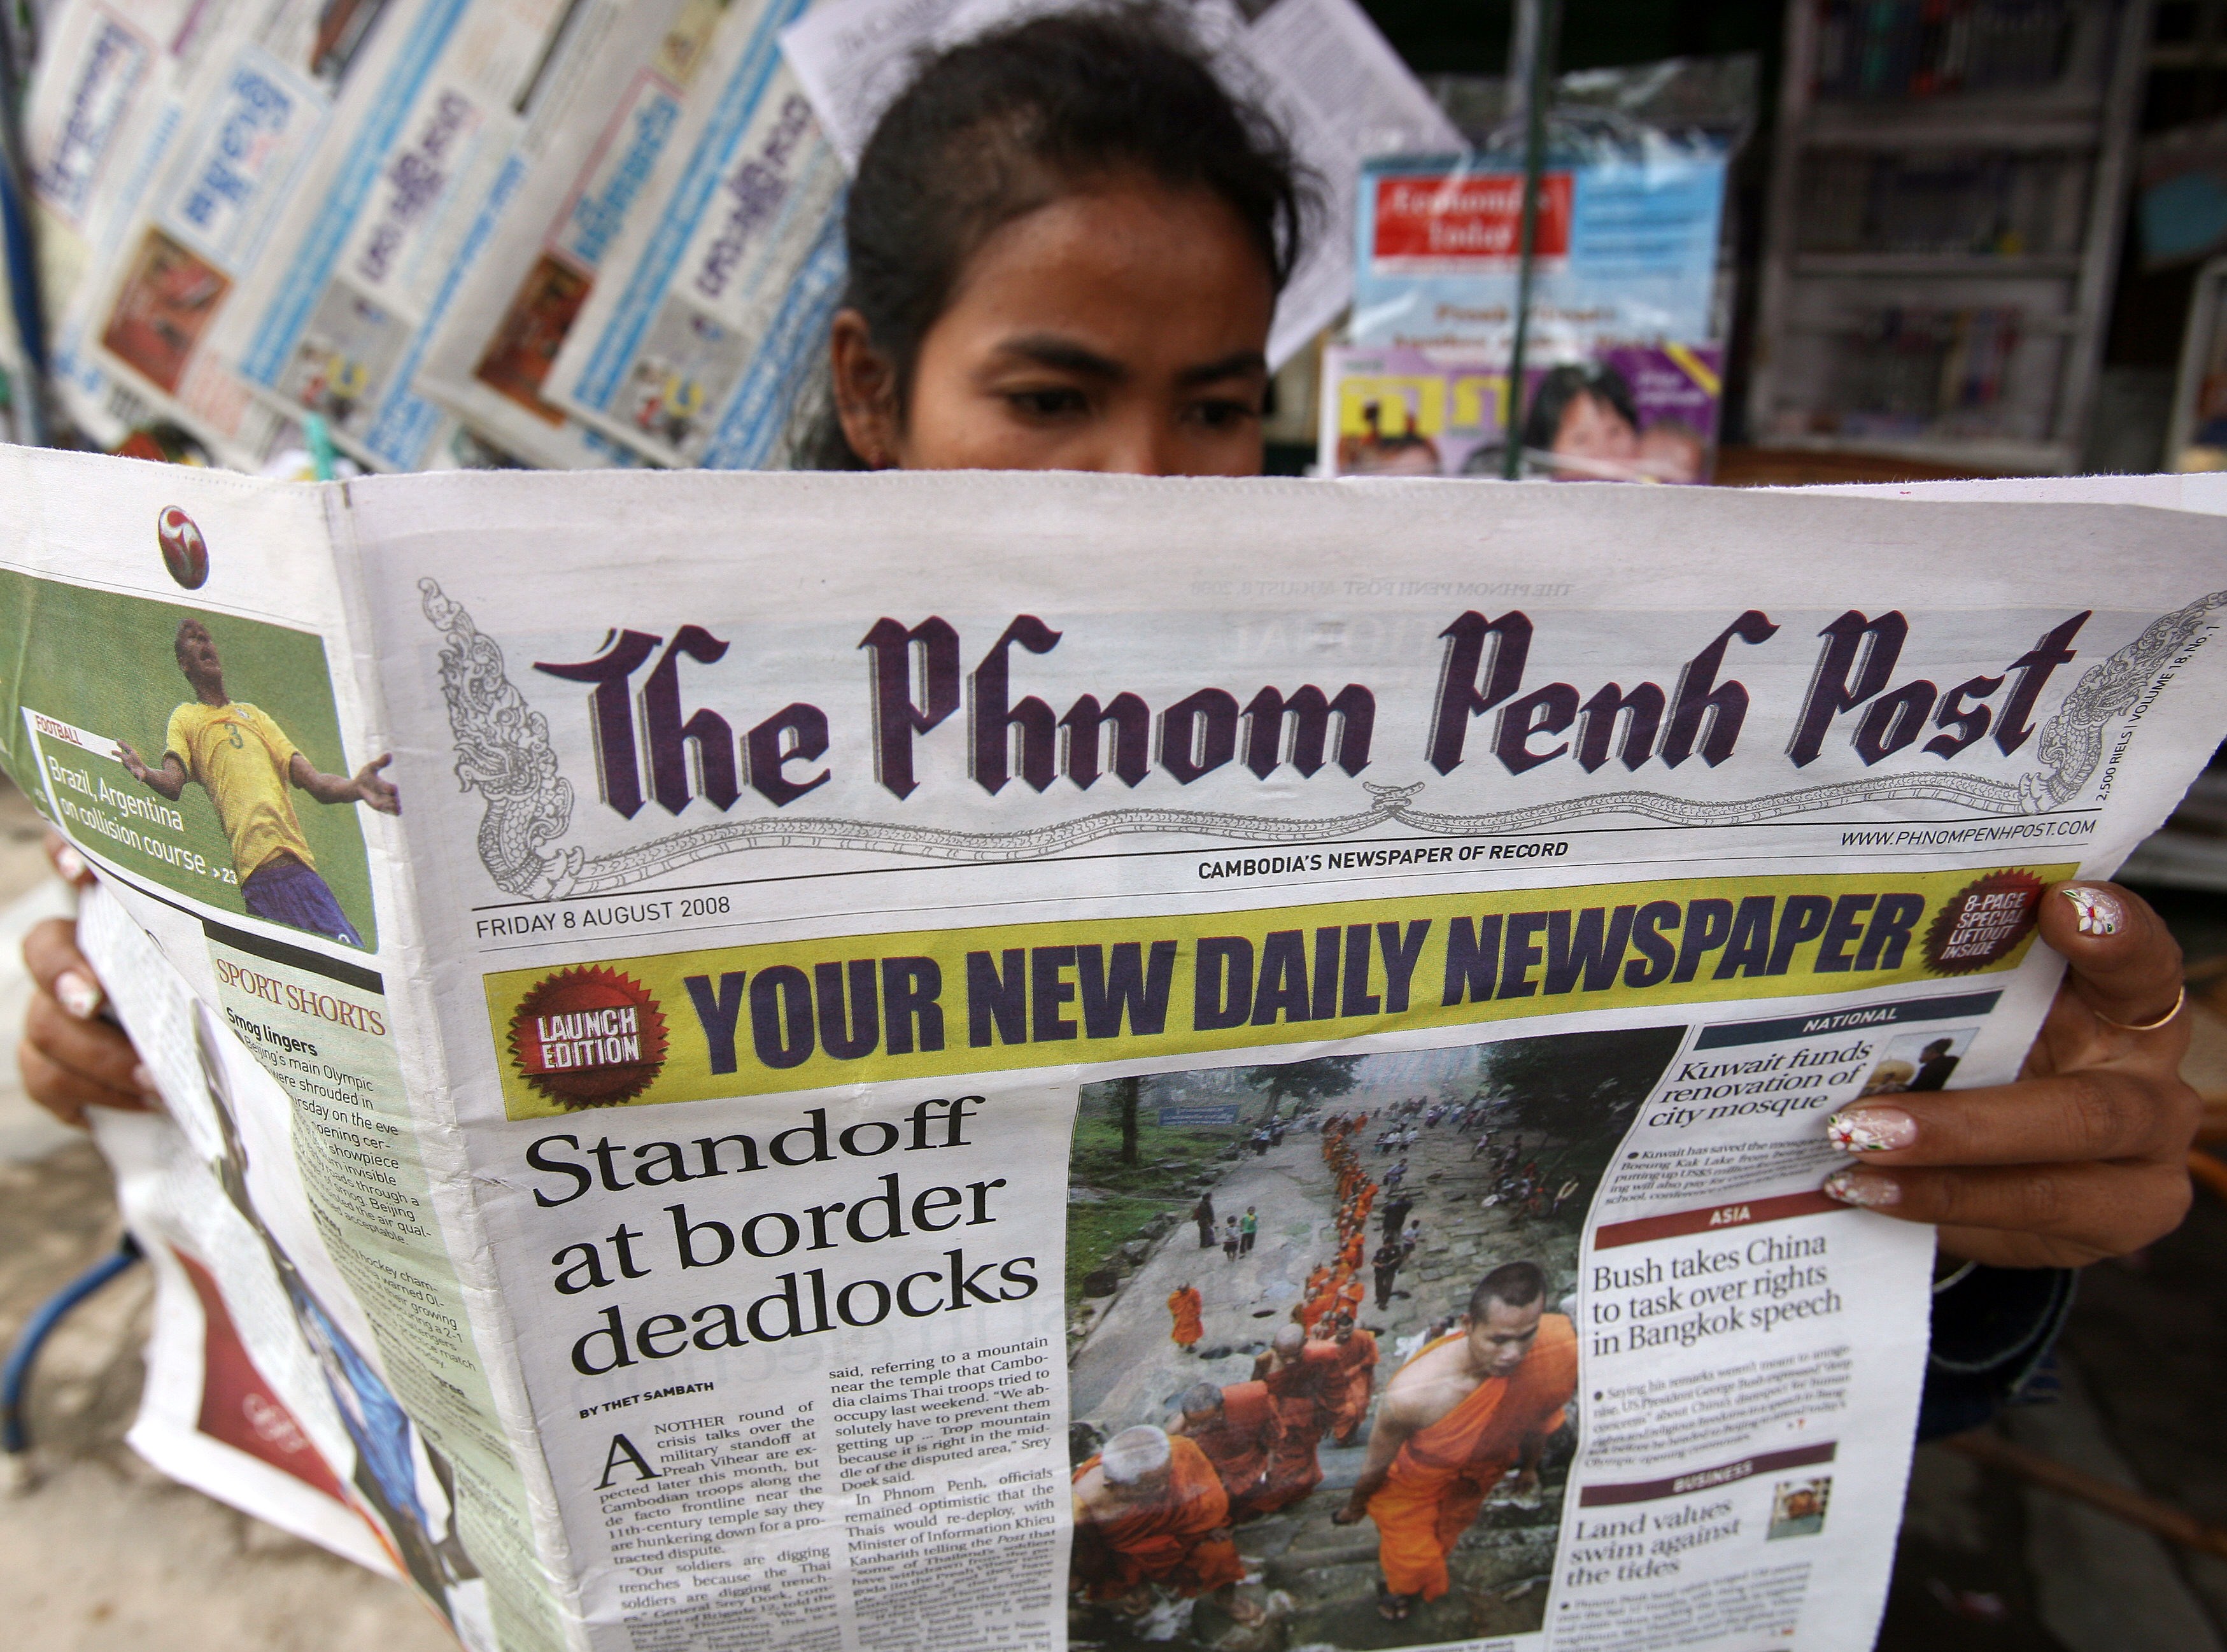 A woman reads a copy of the English-language Phnom Penh Post at a news stand in Phnom Penh, Cambodia on August 8, 2008. One of Cambodia's leading newspapers, the Post was bought by Malaysian businessman Sivakumar Ganapathy this past week, raising concerns for its editorial freedom. (Tang Chhin Sothy—AFP/Getty Images)